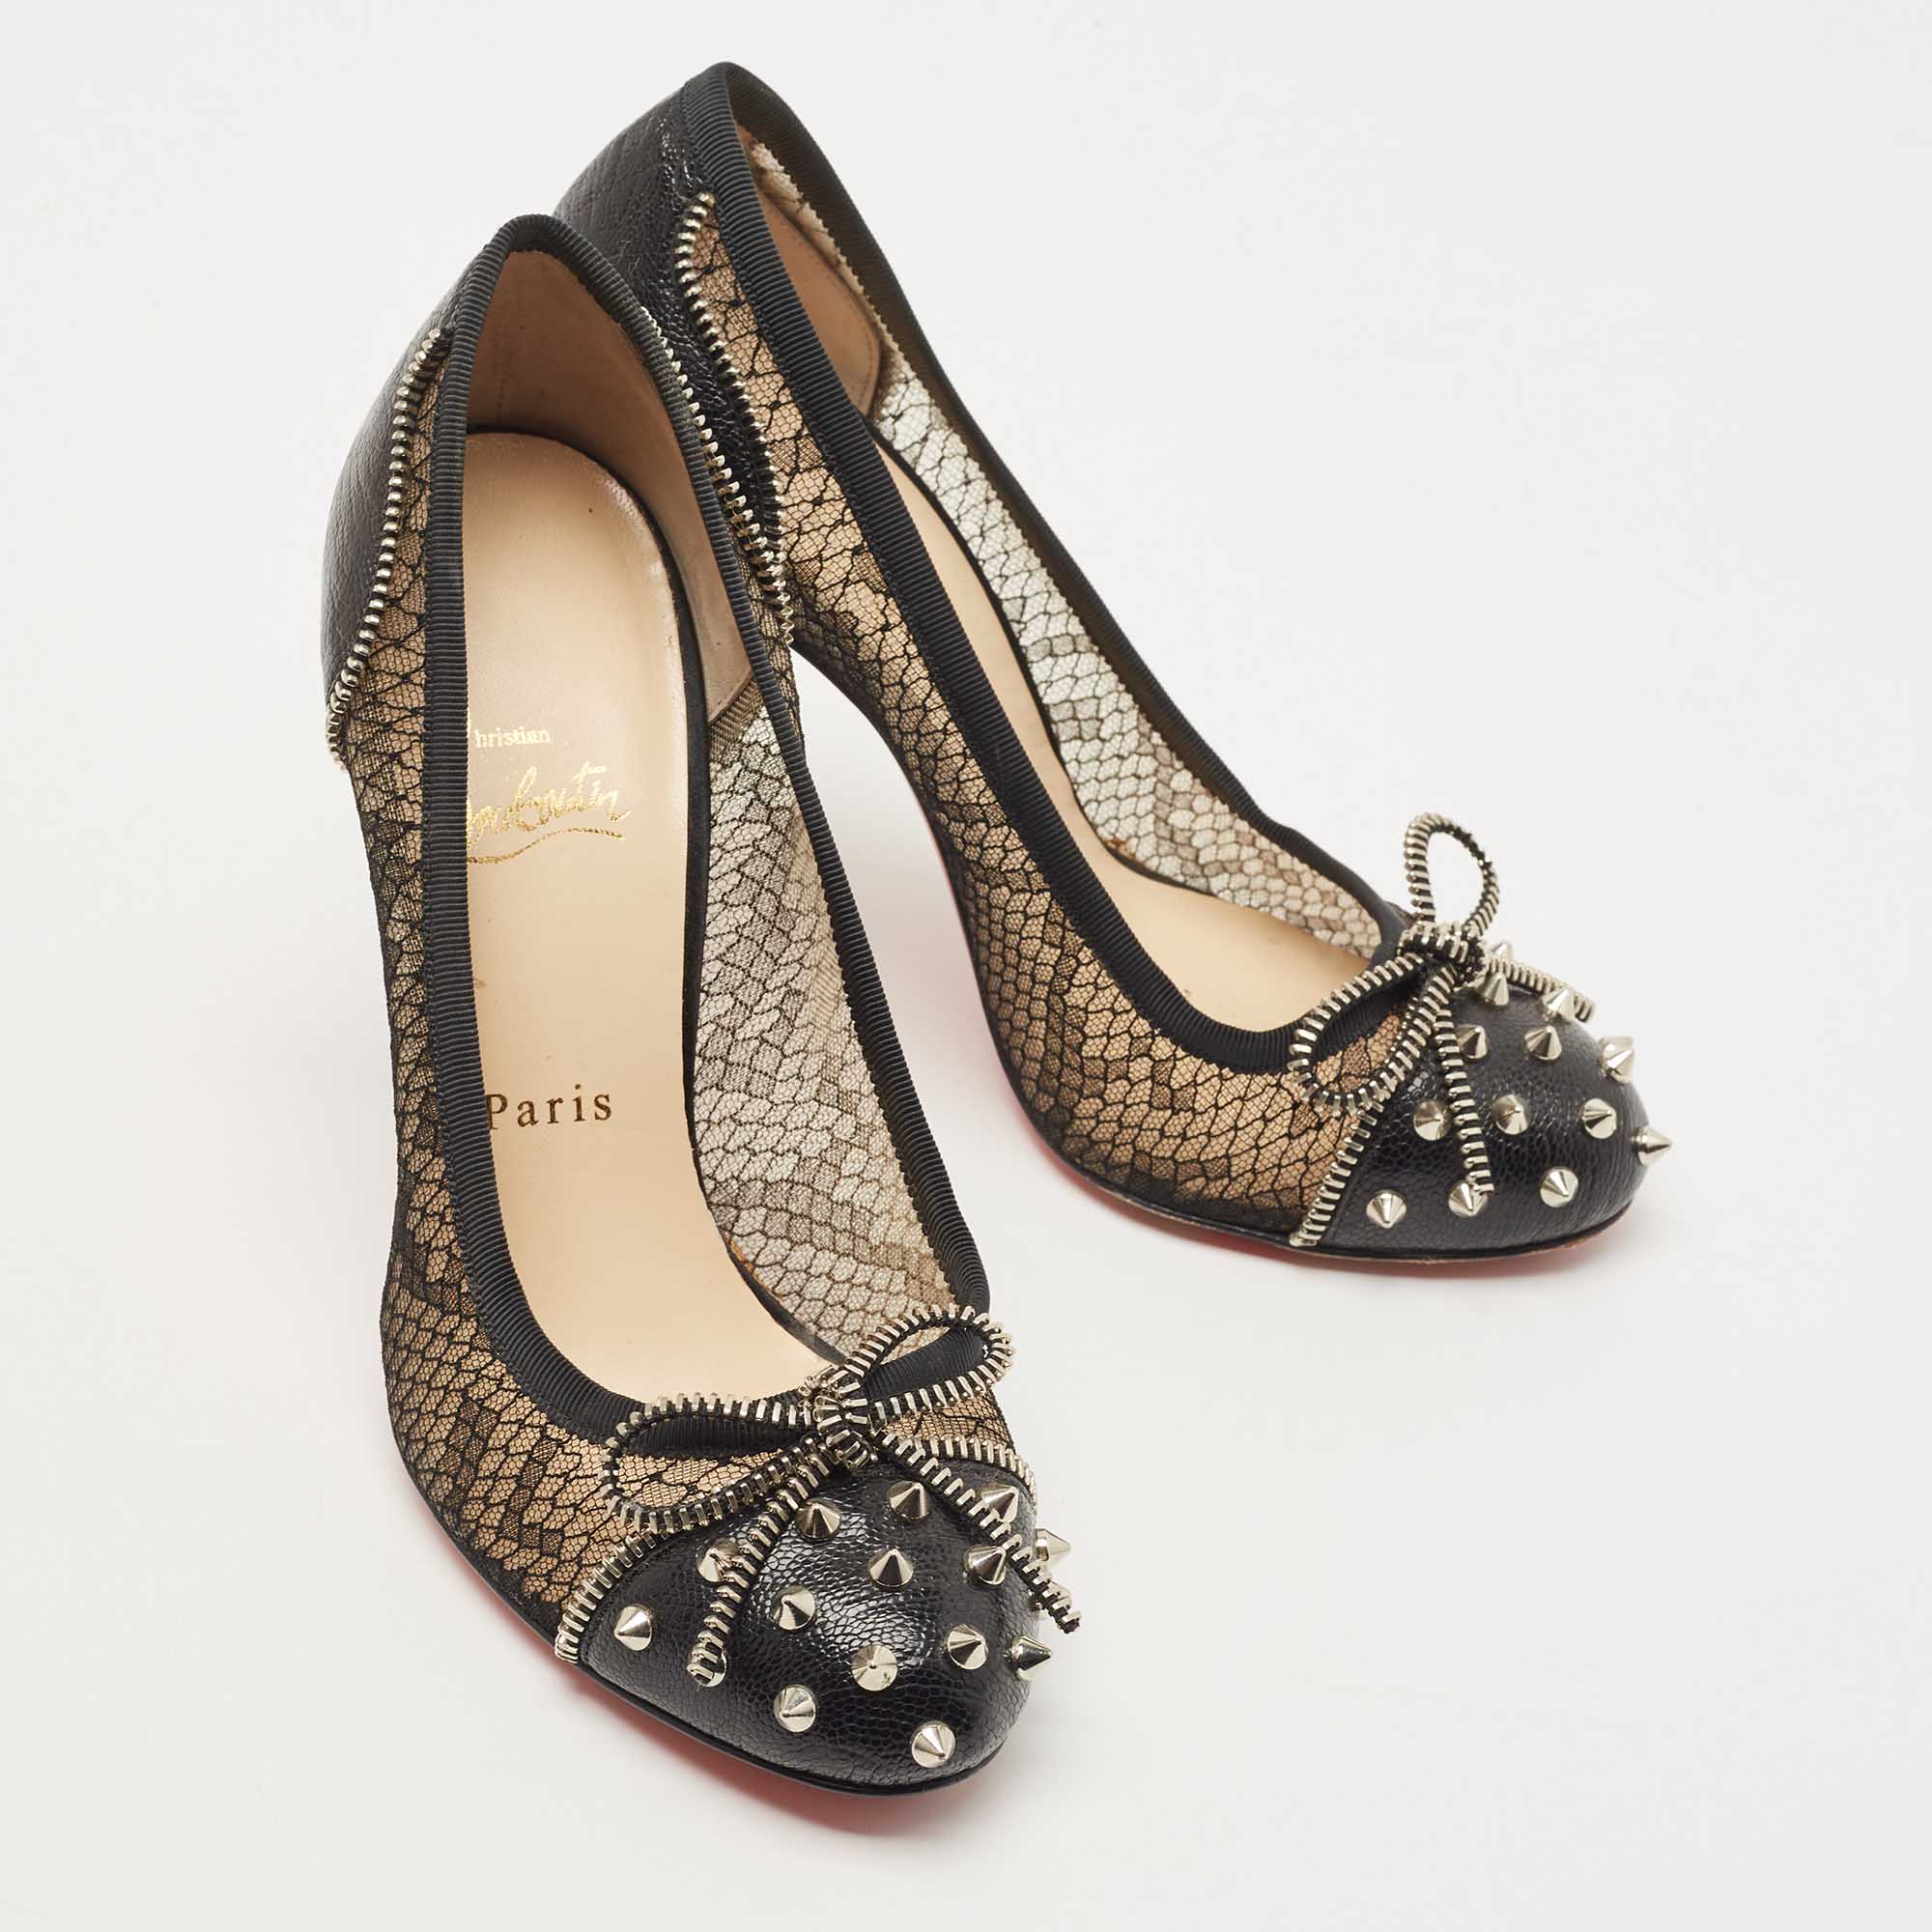 Christian Louboutin Black Leather And Lace Candy Spiked Pumps Size 38